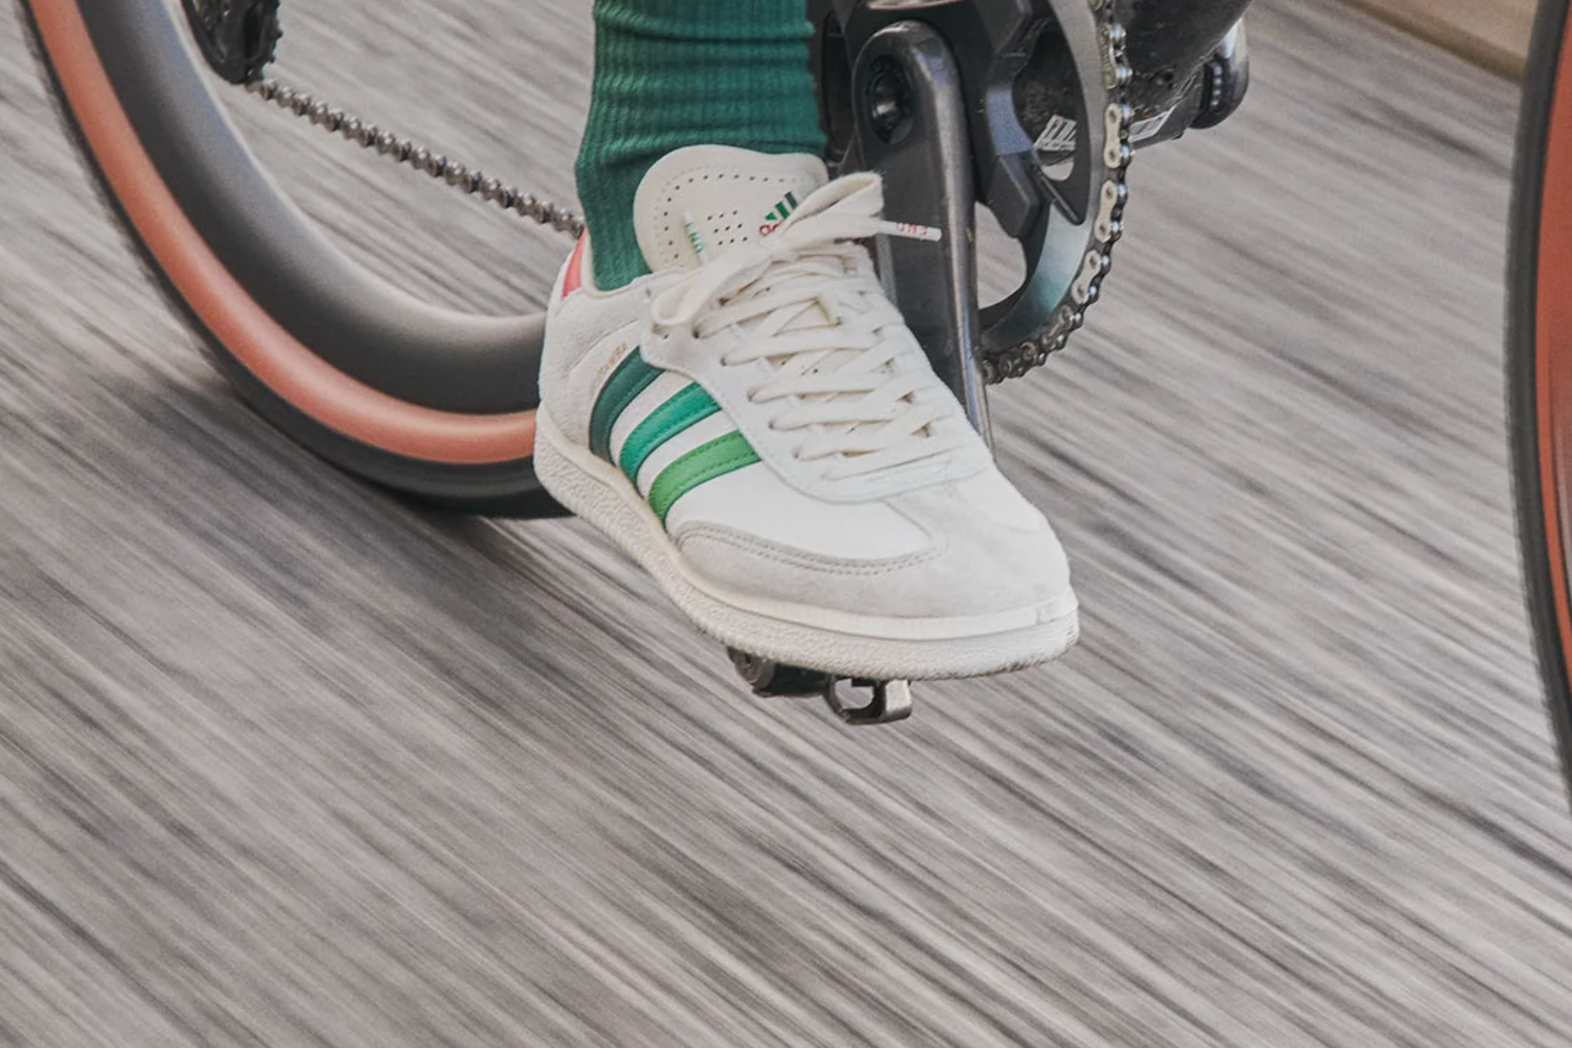 The END. x adidas Velosamba “Social Cycling” Is Designed for Cycling Enthusiasts